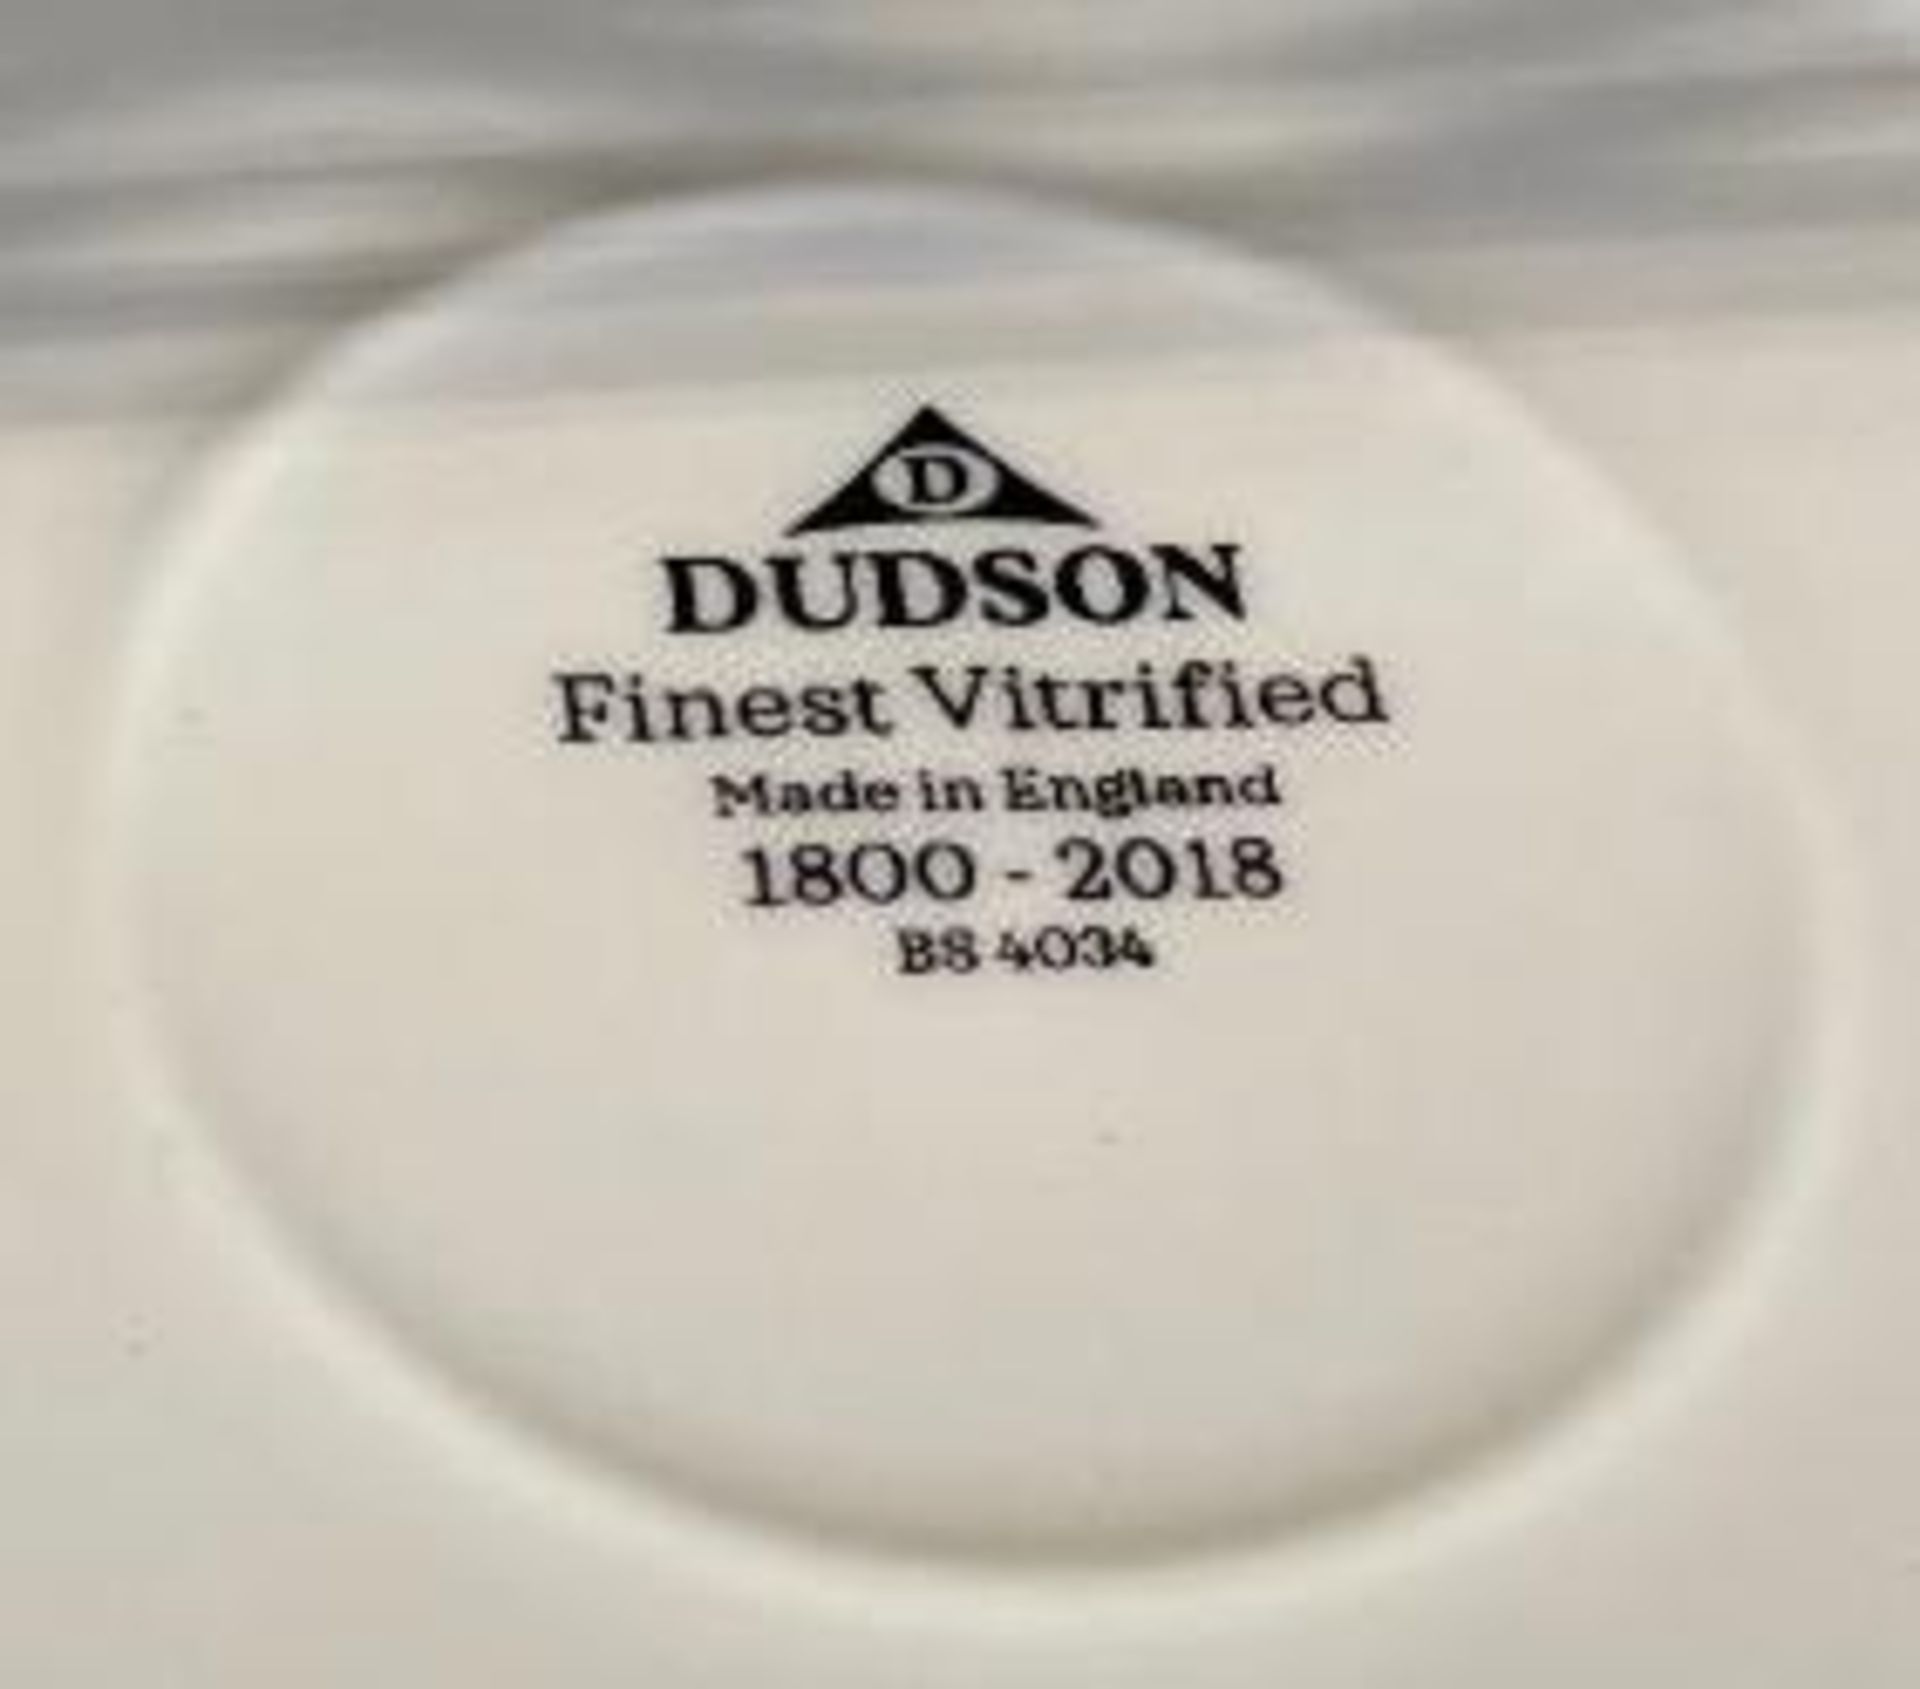 4 CASES OF DUDSON MOSAIC CORAL CHEF BOWLS 10 1/2" - 3/CASE - MADE IN ENGLAND - Image 5 of 7